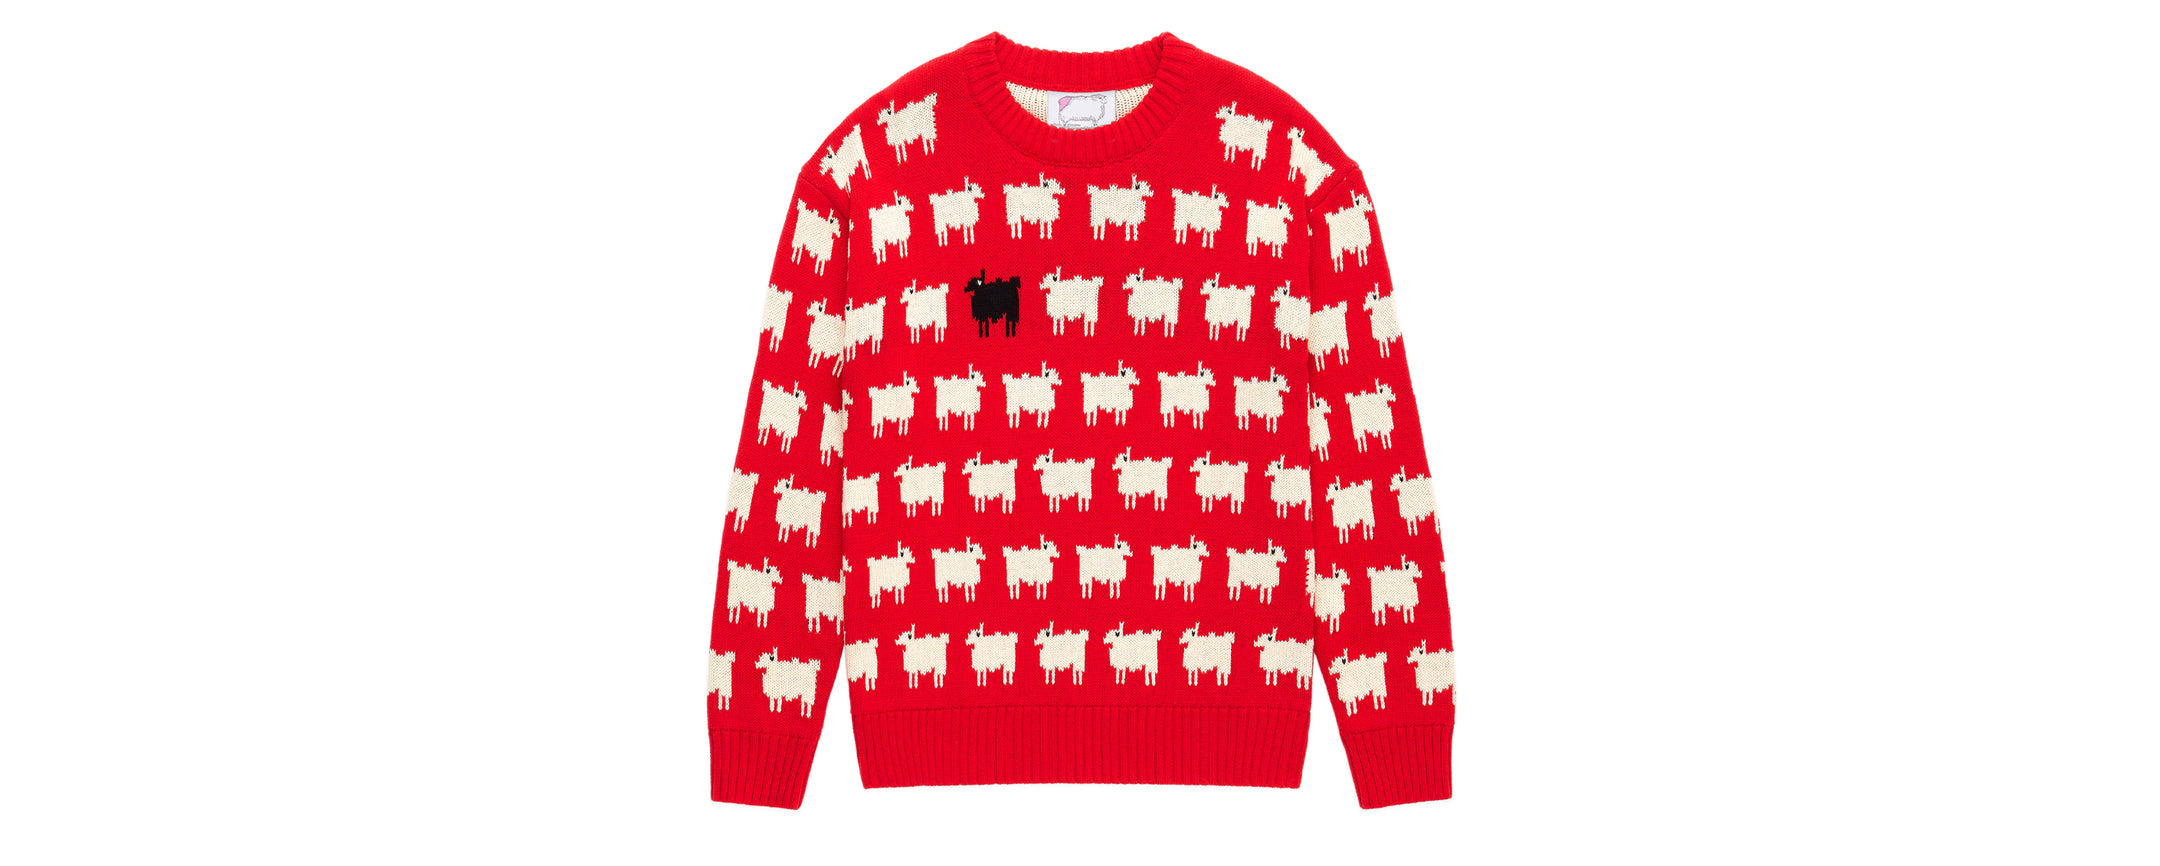 NEW FROM WARM & WONDERFUL: THE “DIANA EDITION” SHEEP SWEATER IN COTTON